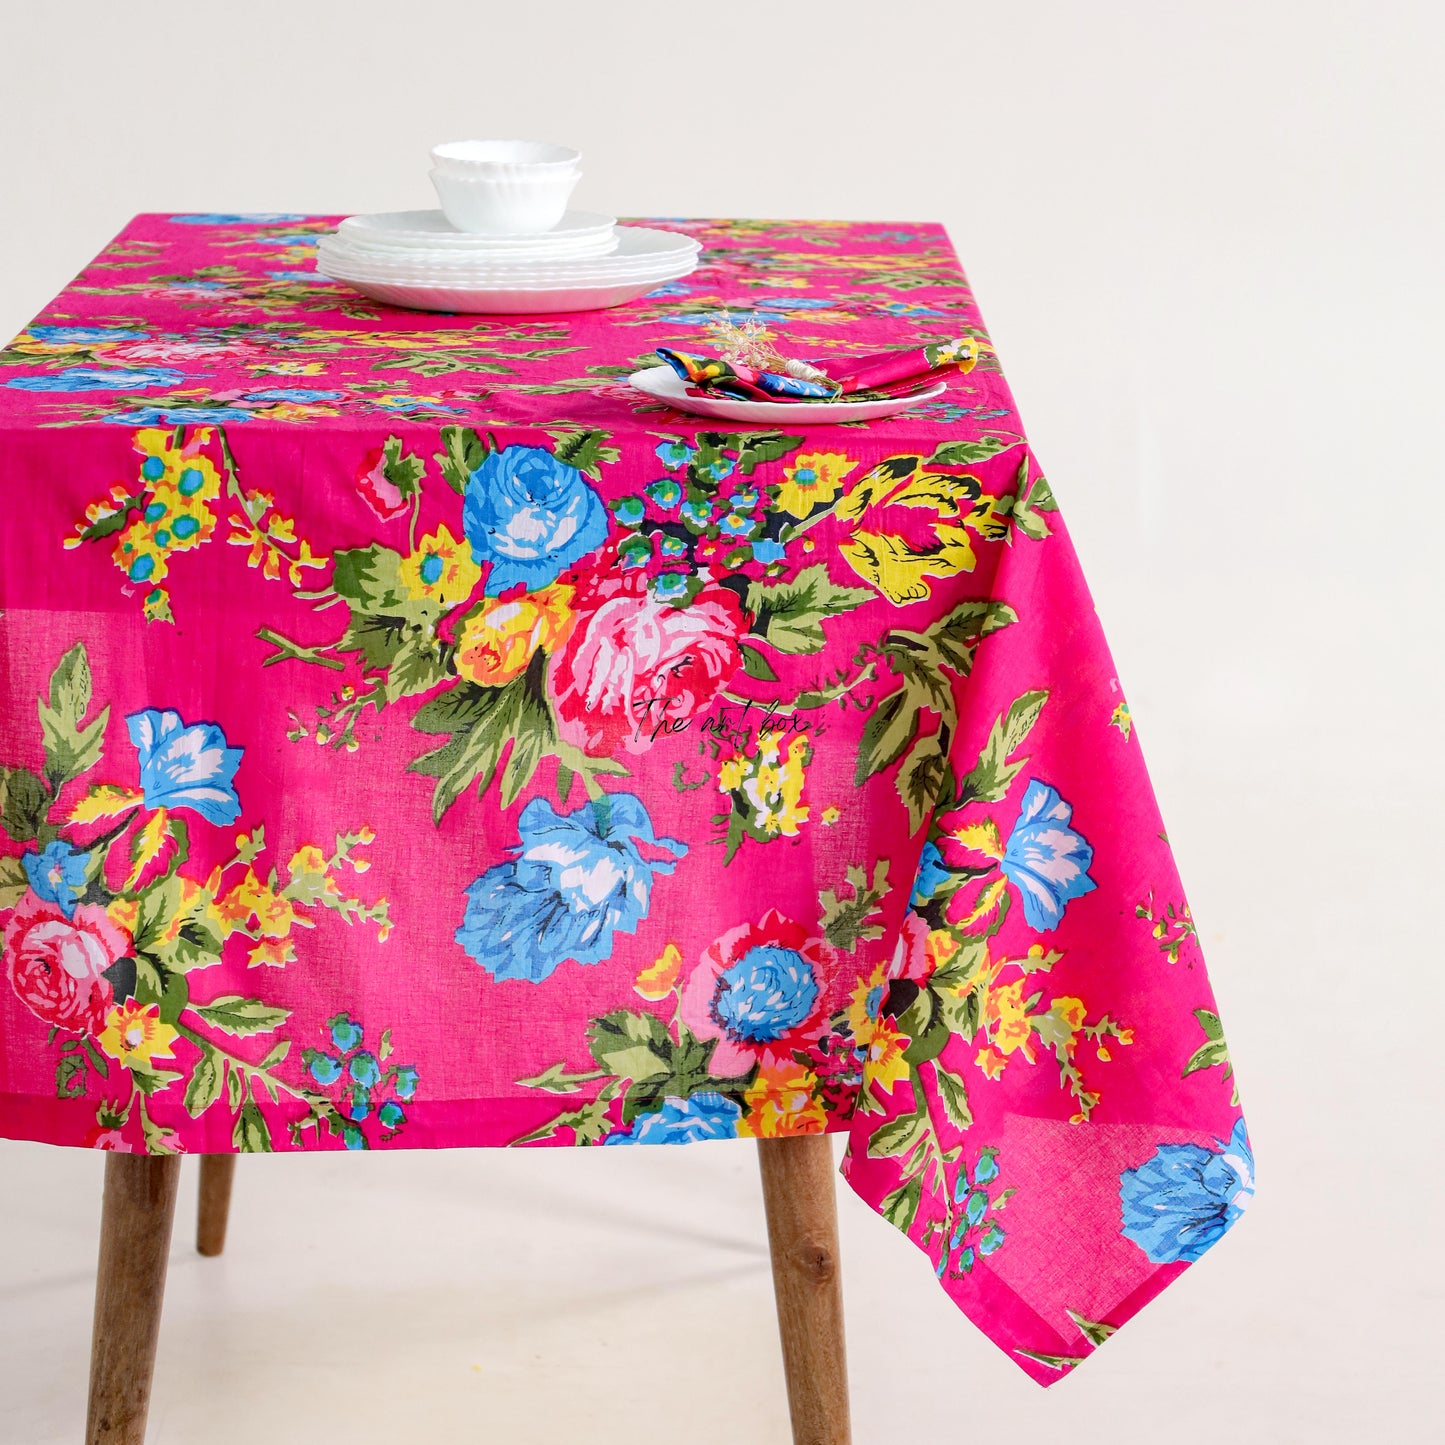 New Red Printed Table Cloth, Red Floral Printed Cotton Table Cover